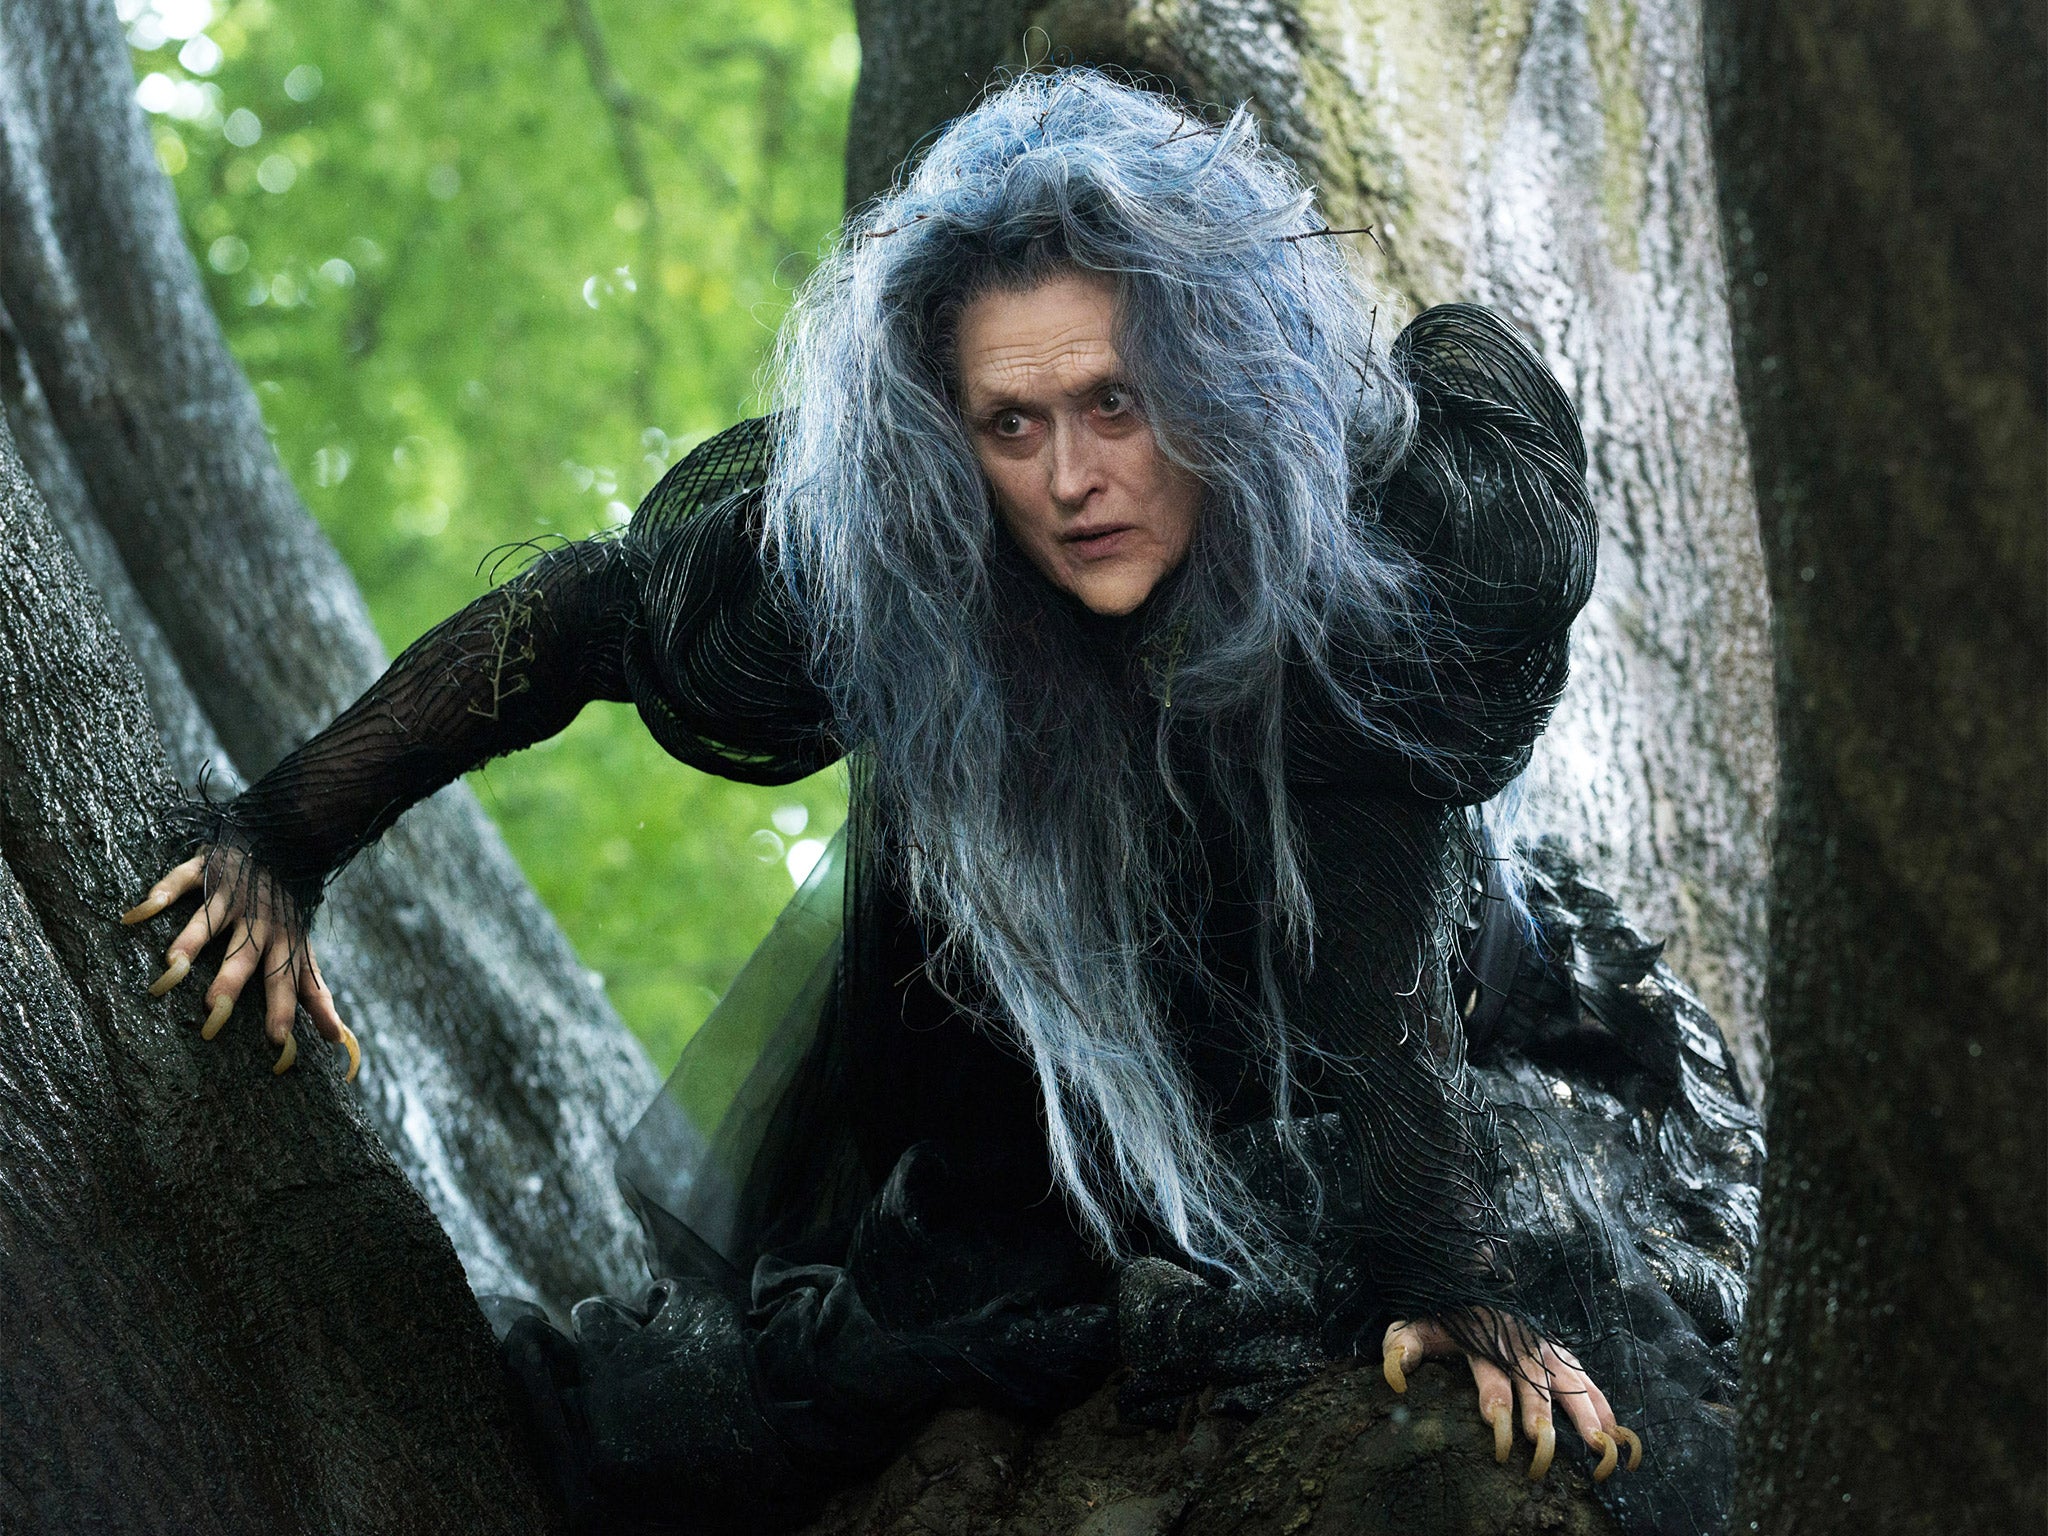 Meryl Streep as the Witch in Into the Woods